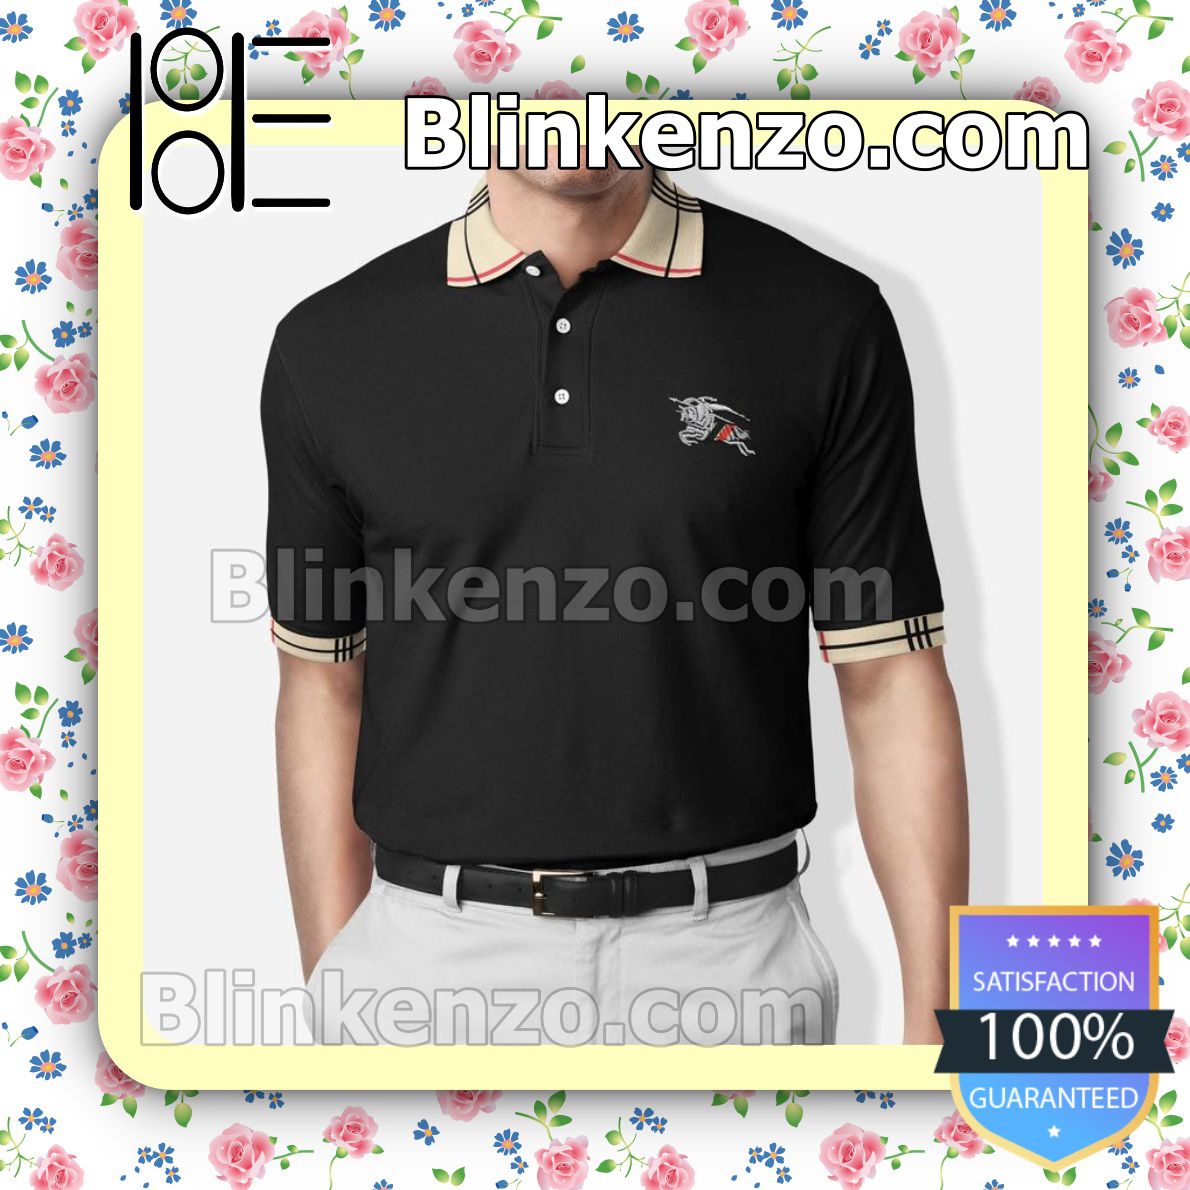 Burberry Plaid Luxury Brand Clothing Black Embroidered Polo Shirts